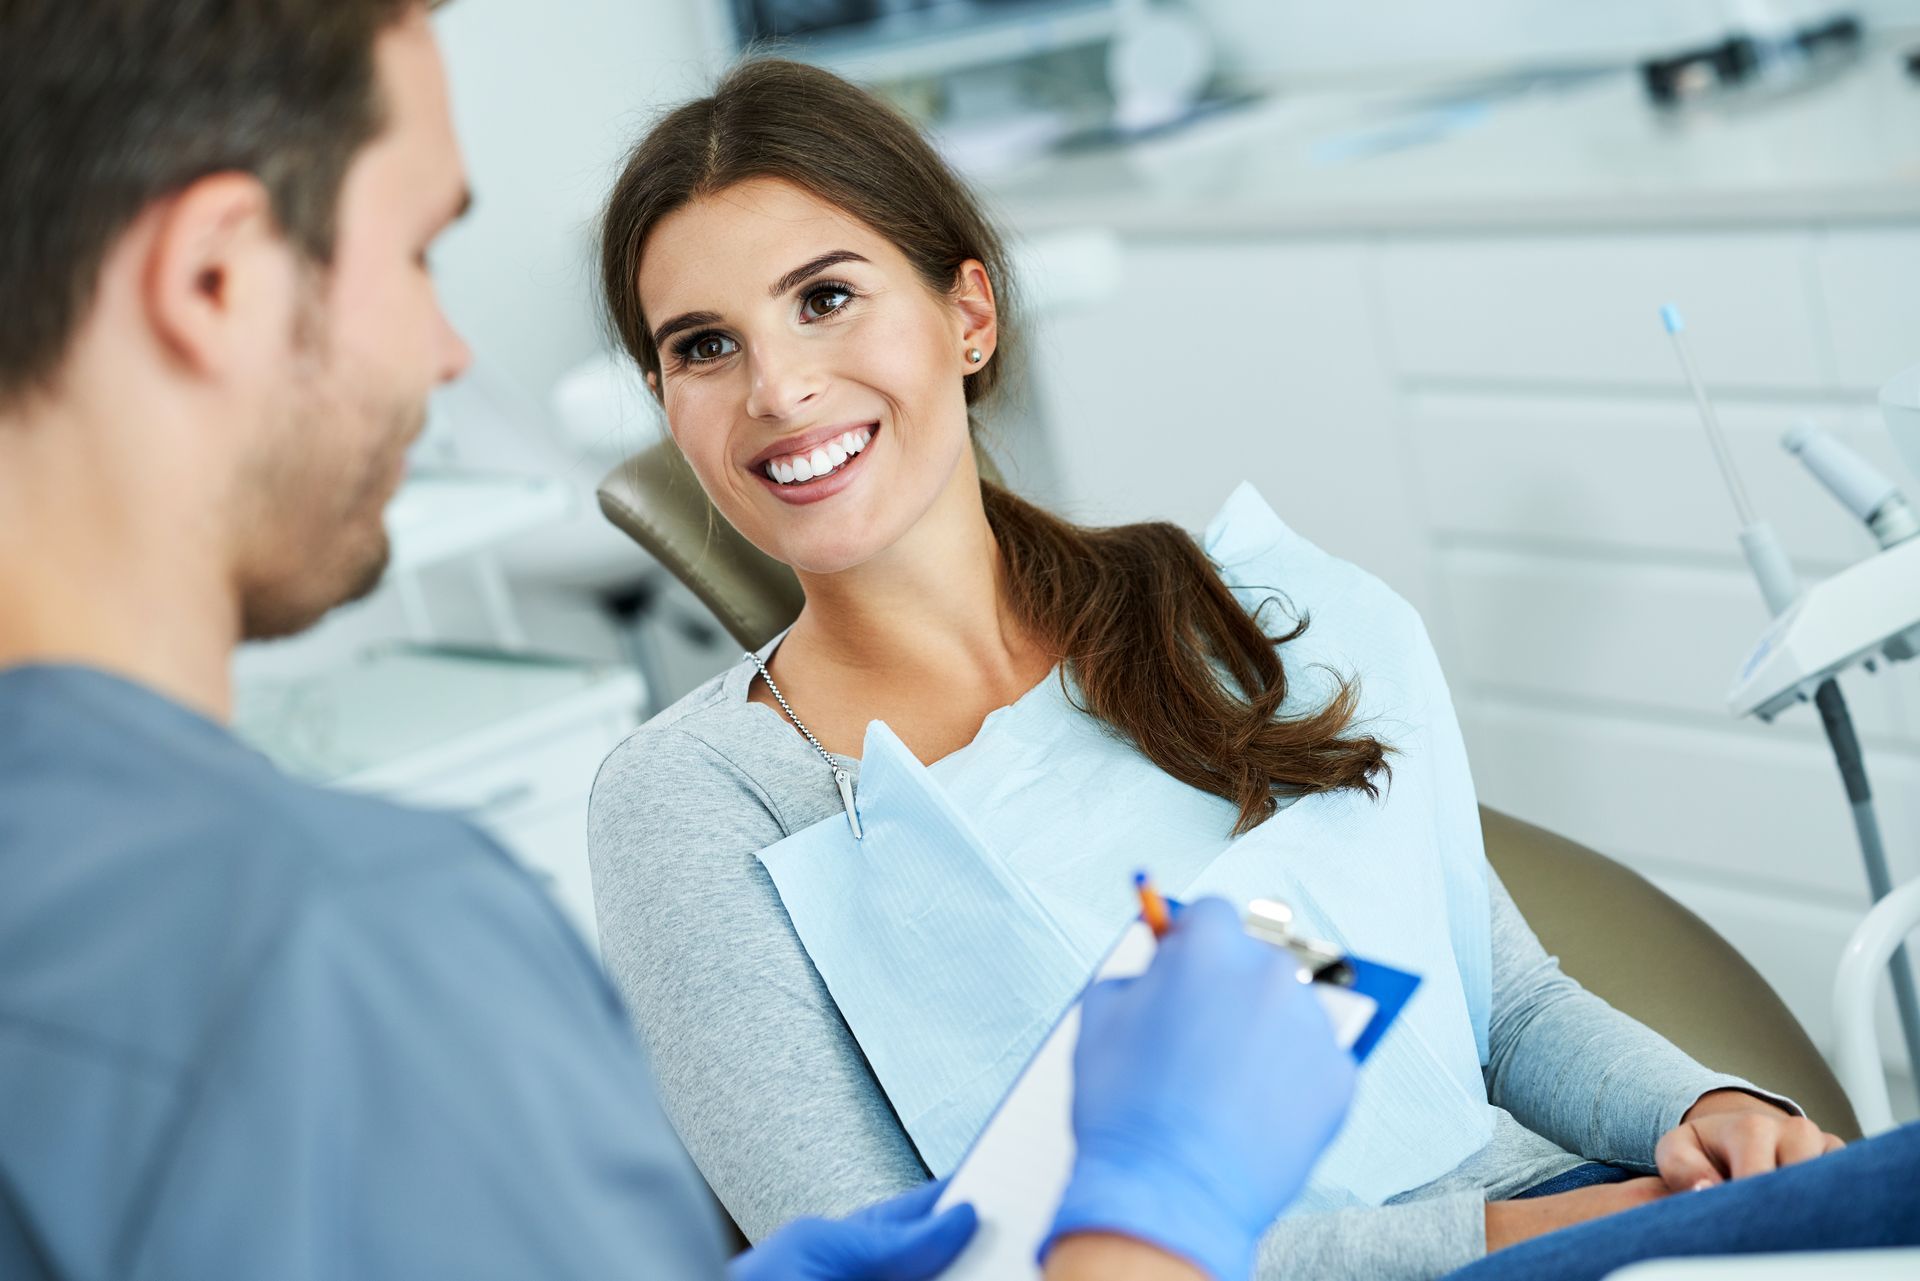 Smiling woman sitting in a dental chair looking at his dentist explaining the dental procedure